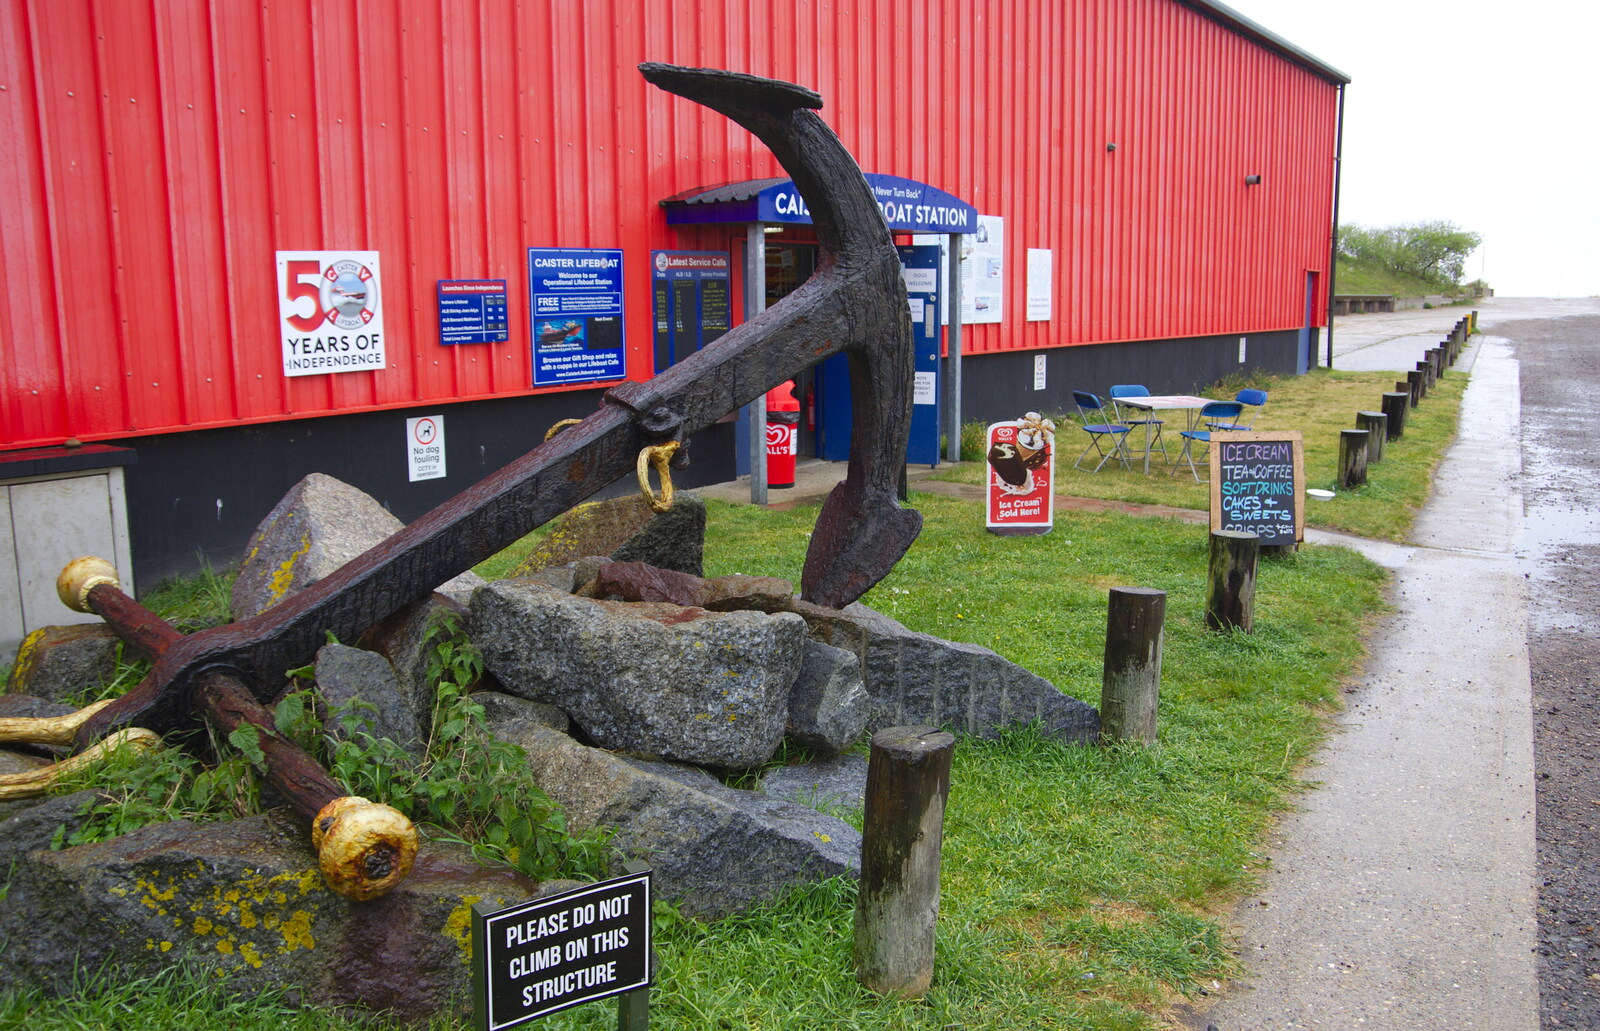 There's a big anchor outside the lifeboat shed from A Postcard From Caister on Sea, Norfolk - 6th May 2019